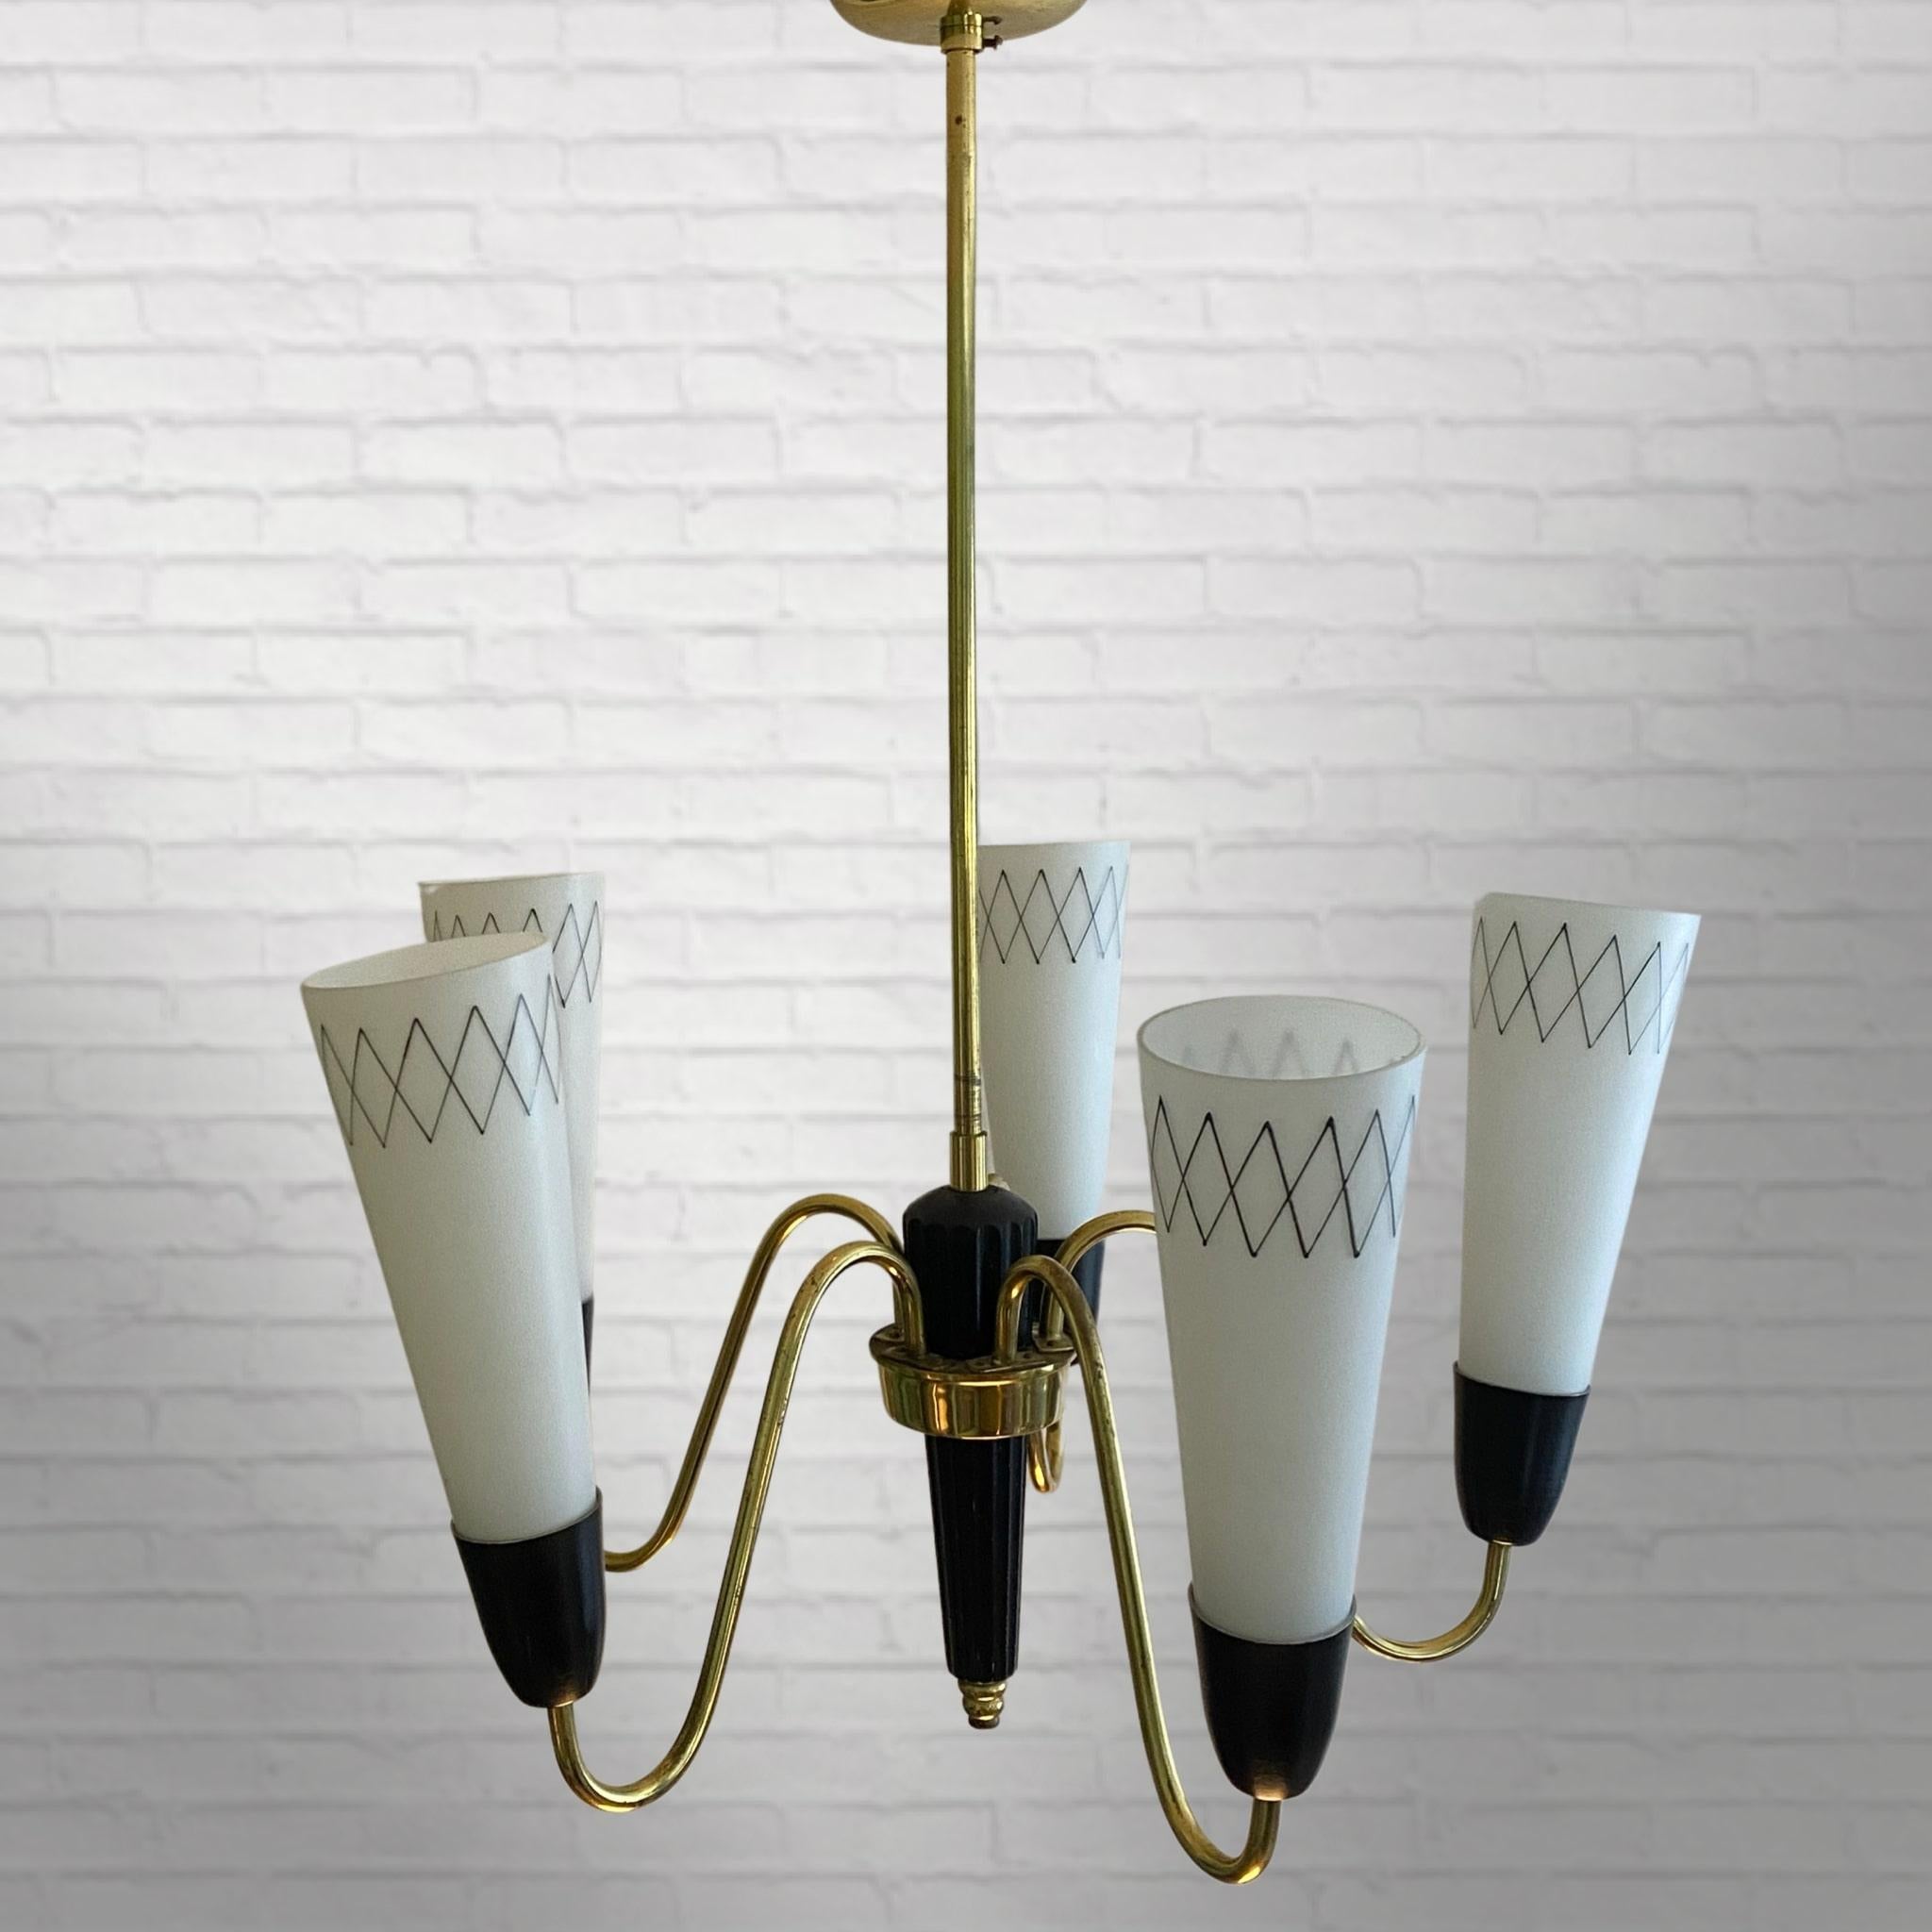 Swedish modernist chandelier made from brass with a black wooden obelisk in the middle. Five curved arms hold cone-shaped glass shades adorned with a geometric pattern. Produced by an unidentified Swedish manufacturer in the 1950s. With its